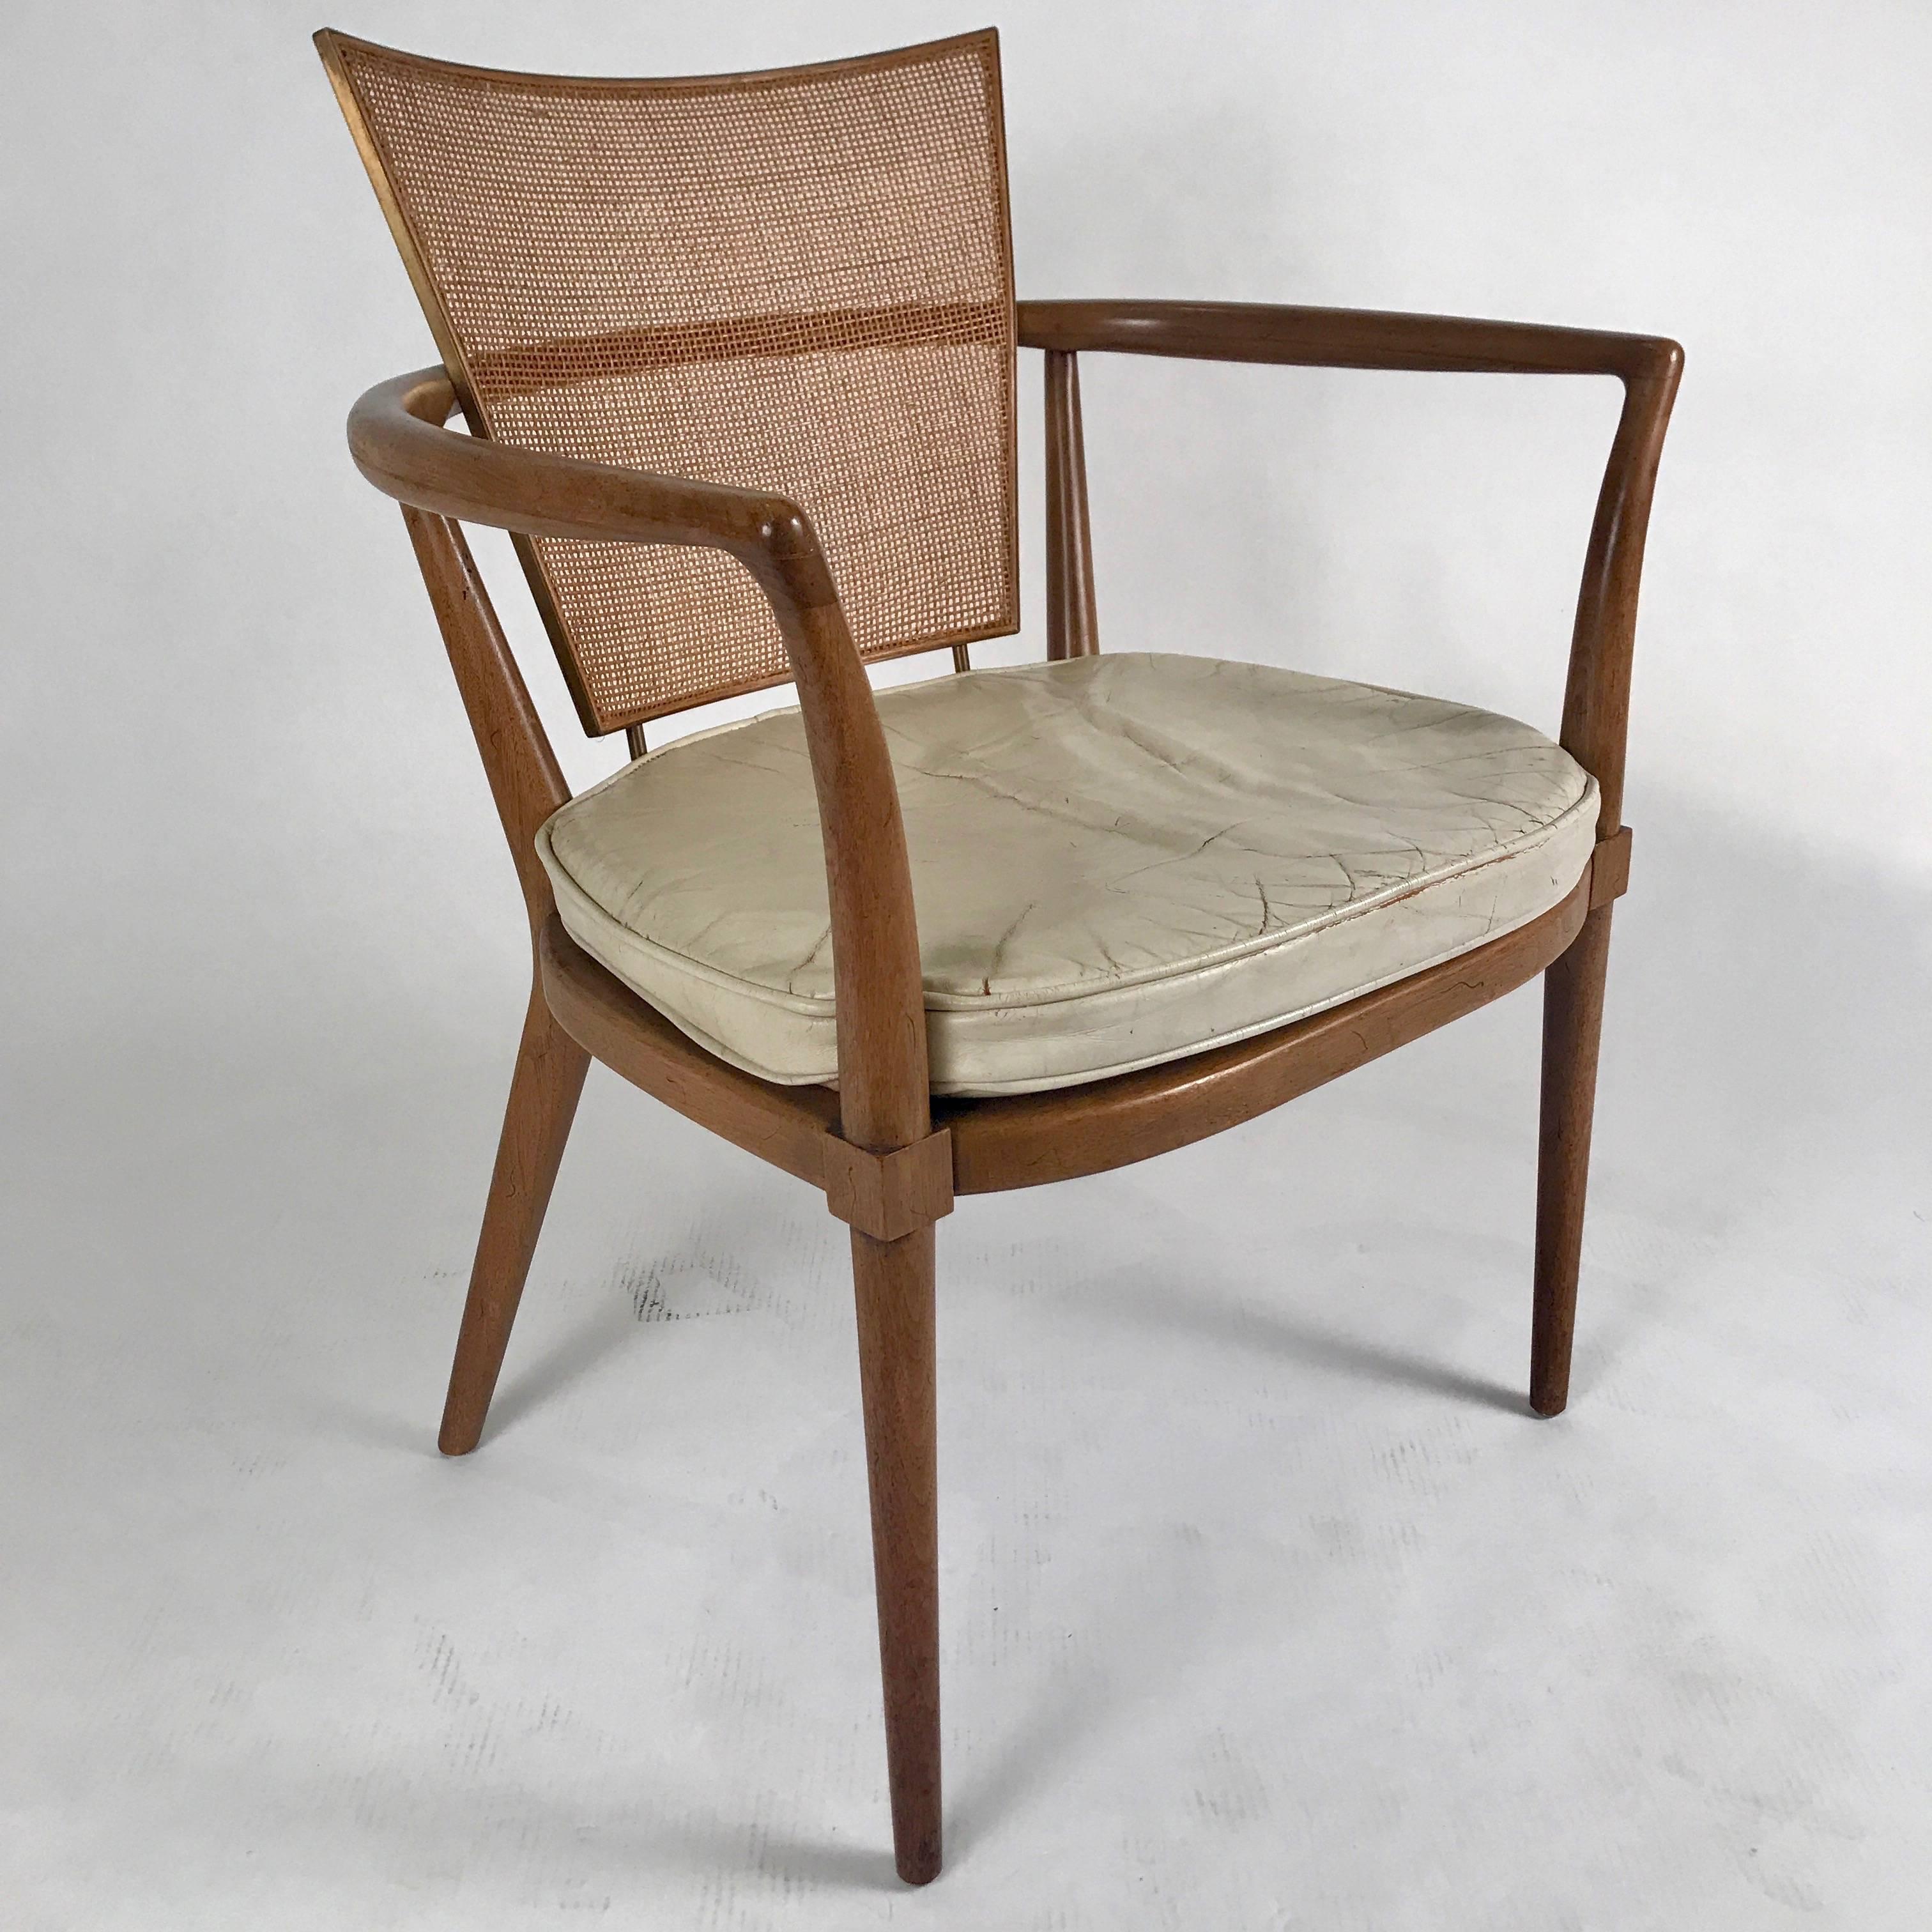 Stunning, sculptural armchair designed by Bert England for Johnson Furniture. Sturdy frame of fruitwood with finely caned seat back on a solid brass frame.
 